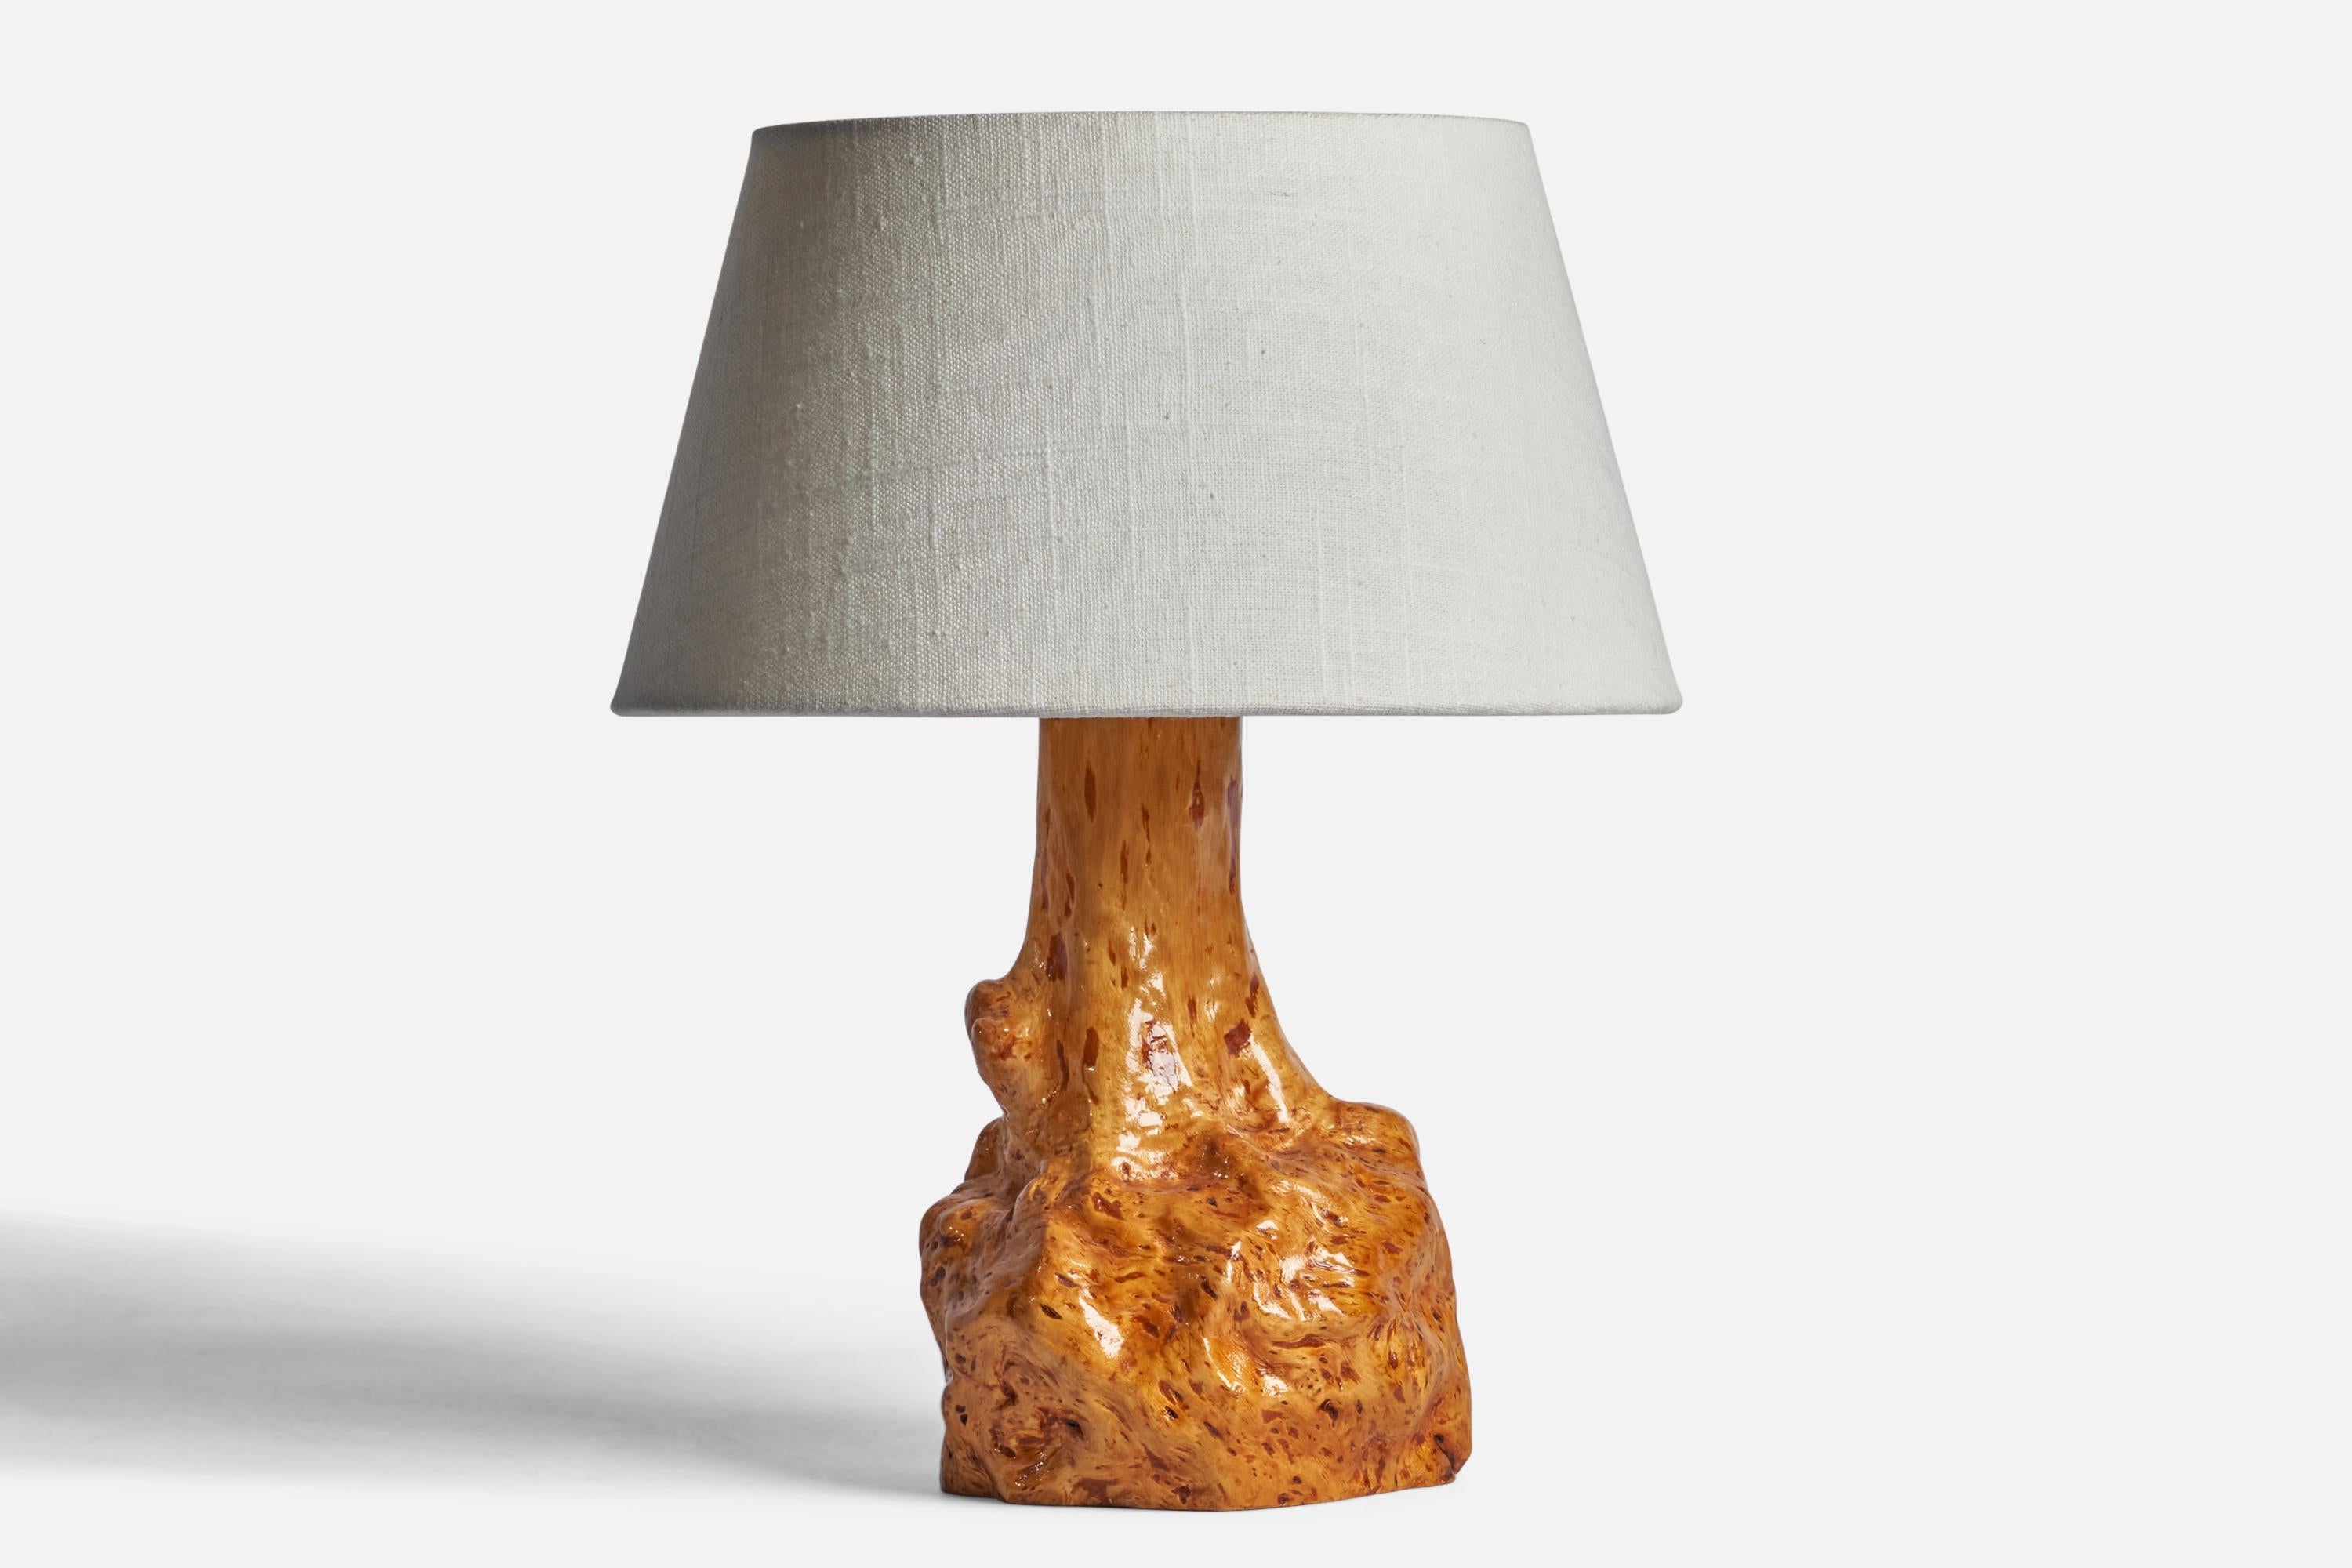 A freeform burl wood table lamp designed and produced in Sweden, c. 1960s.

Dimensions of Lamp (inches): 10” H x 5.25” Diameter
Dimensions of Shade (inches): 7” Top Diameter x 10” Bottom Diameter x 5.5” H 
Dimensions of Lamp with Shade (inches):